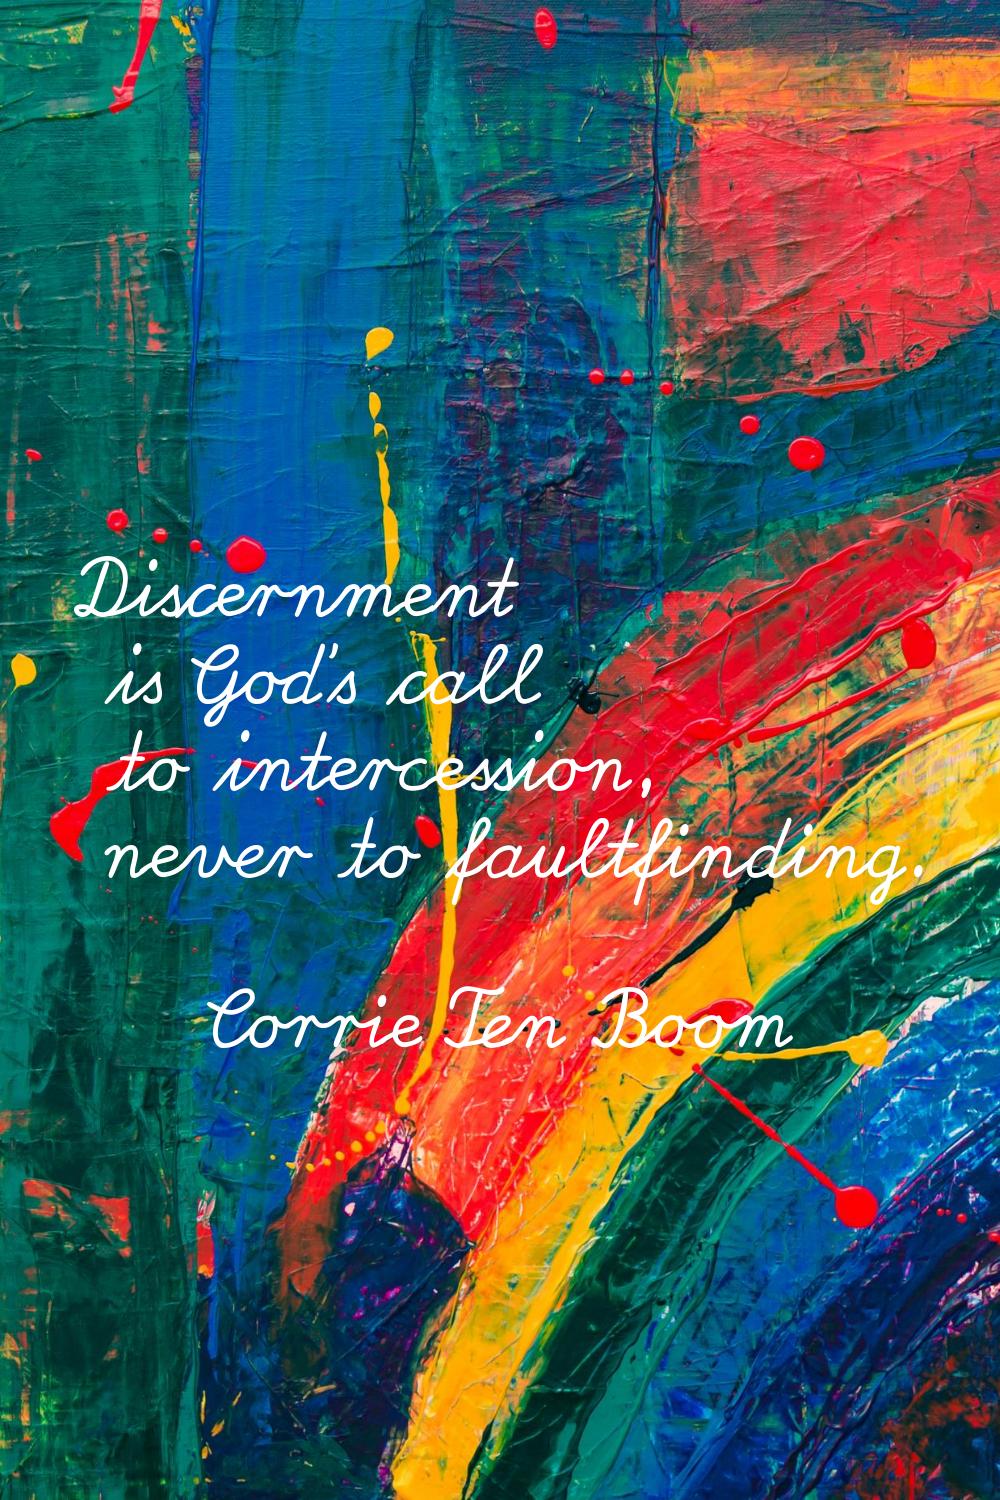 Discernment is God's call to intercession, never to faultfinding.